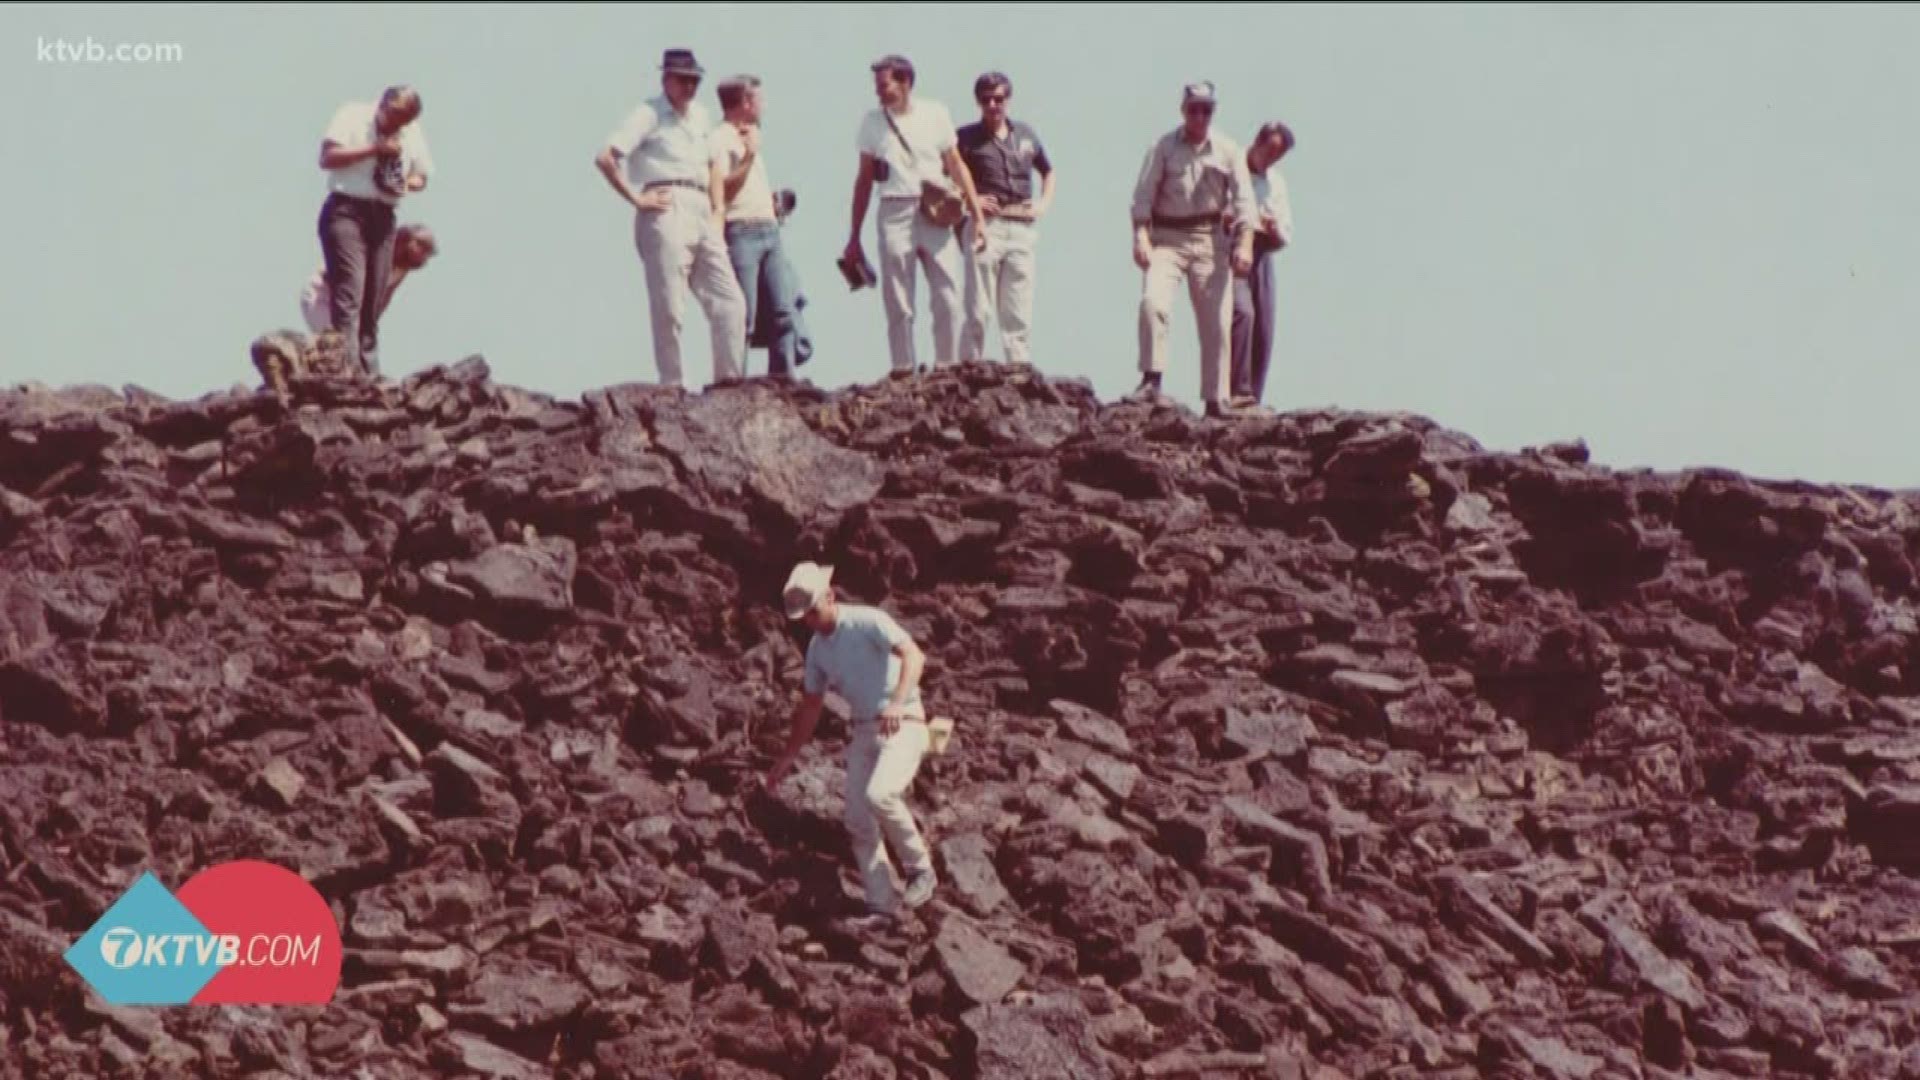 They came to Craters of the Moon to learn more about volcanic geology.